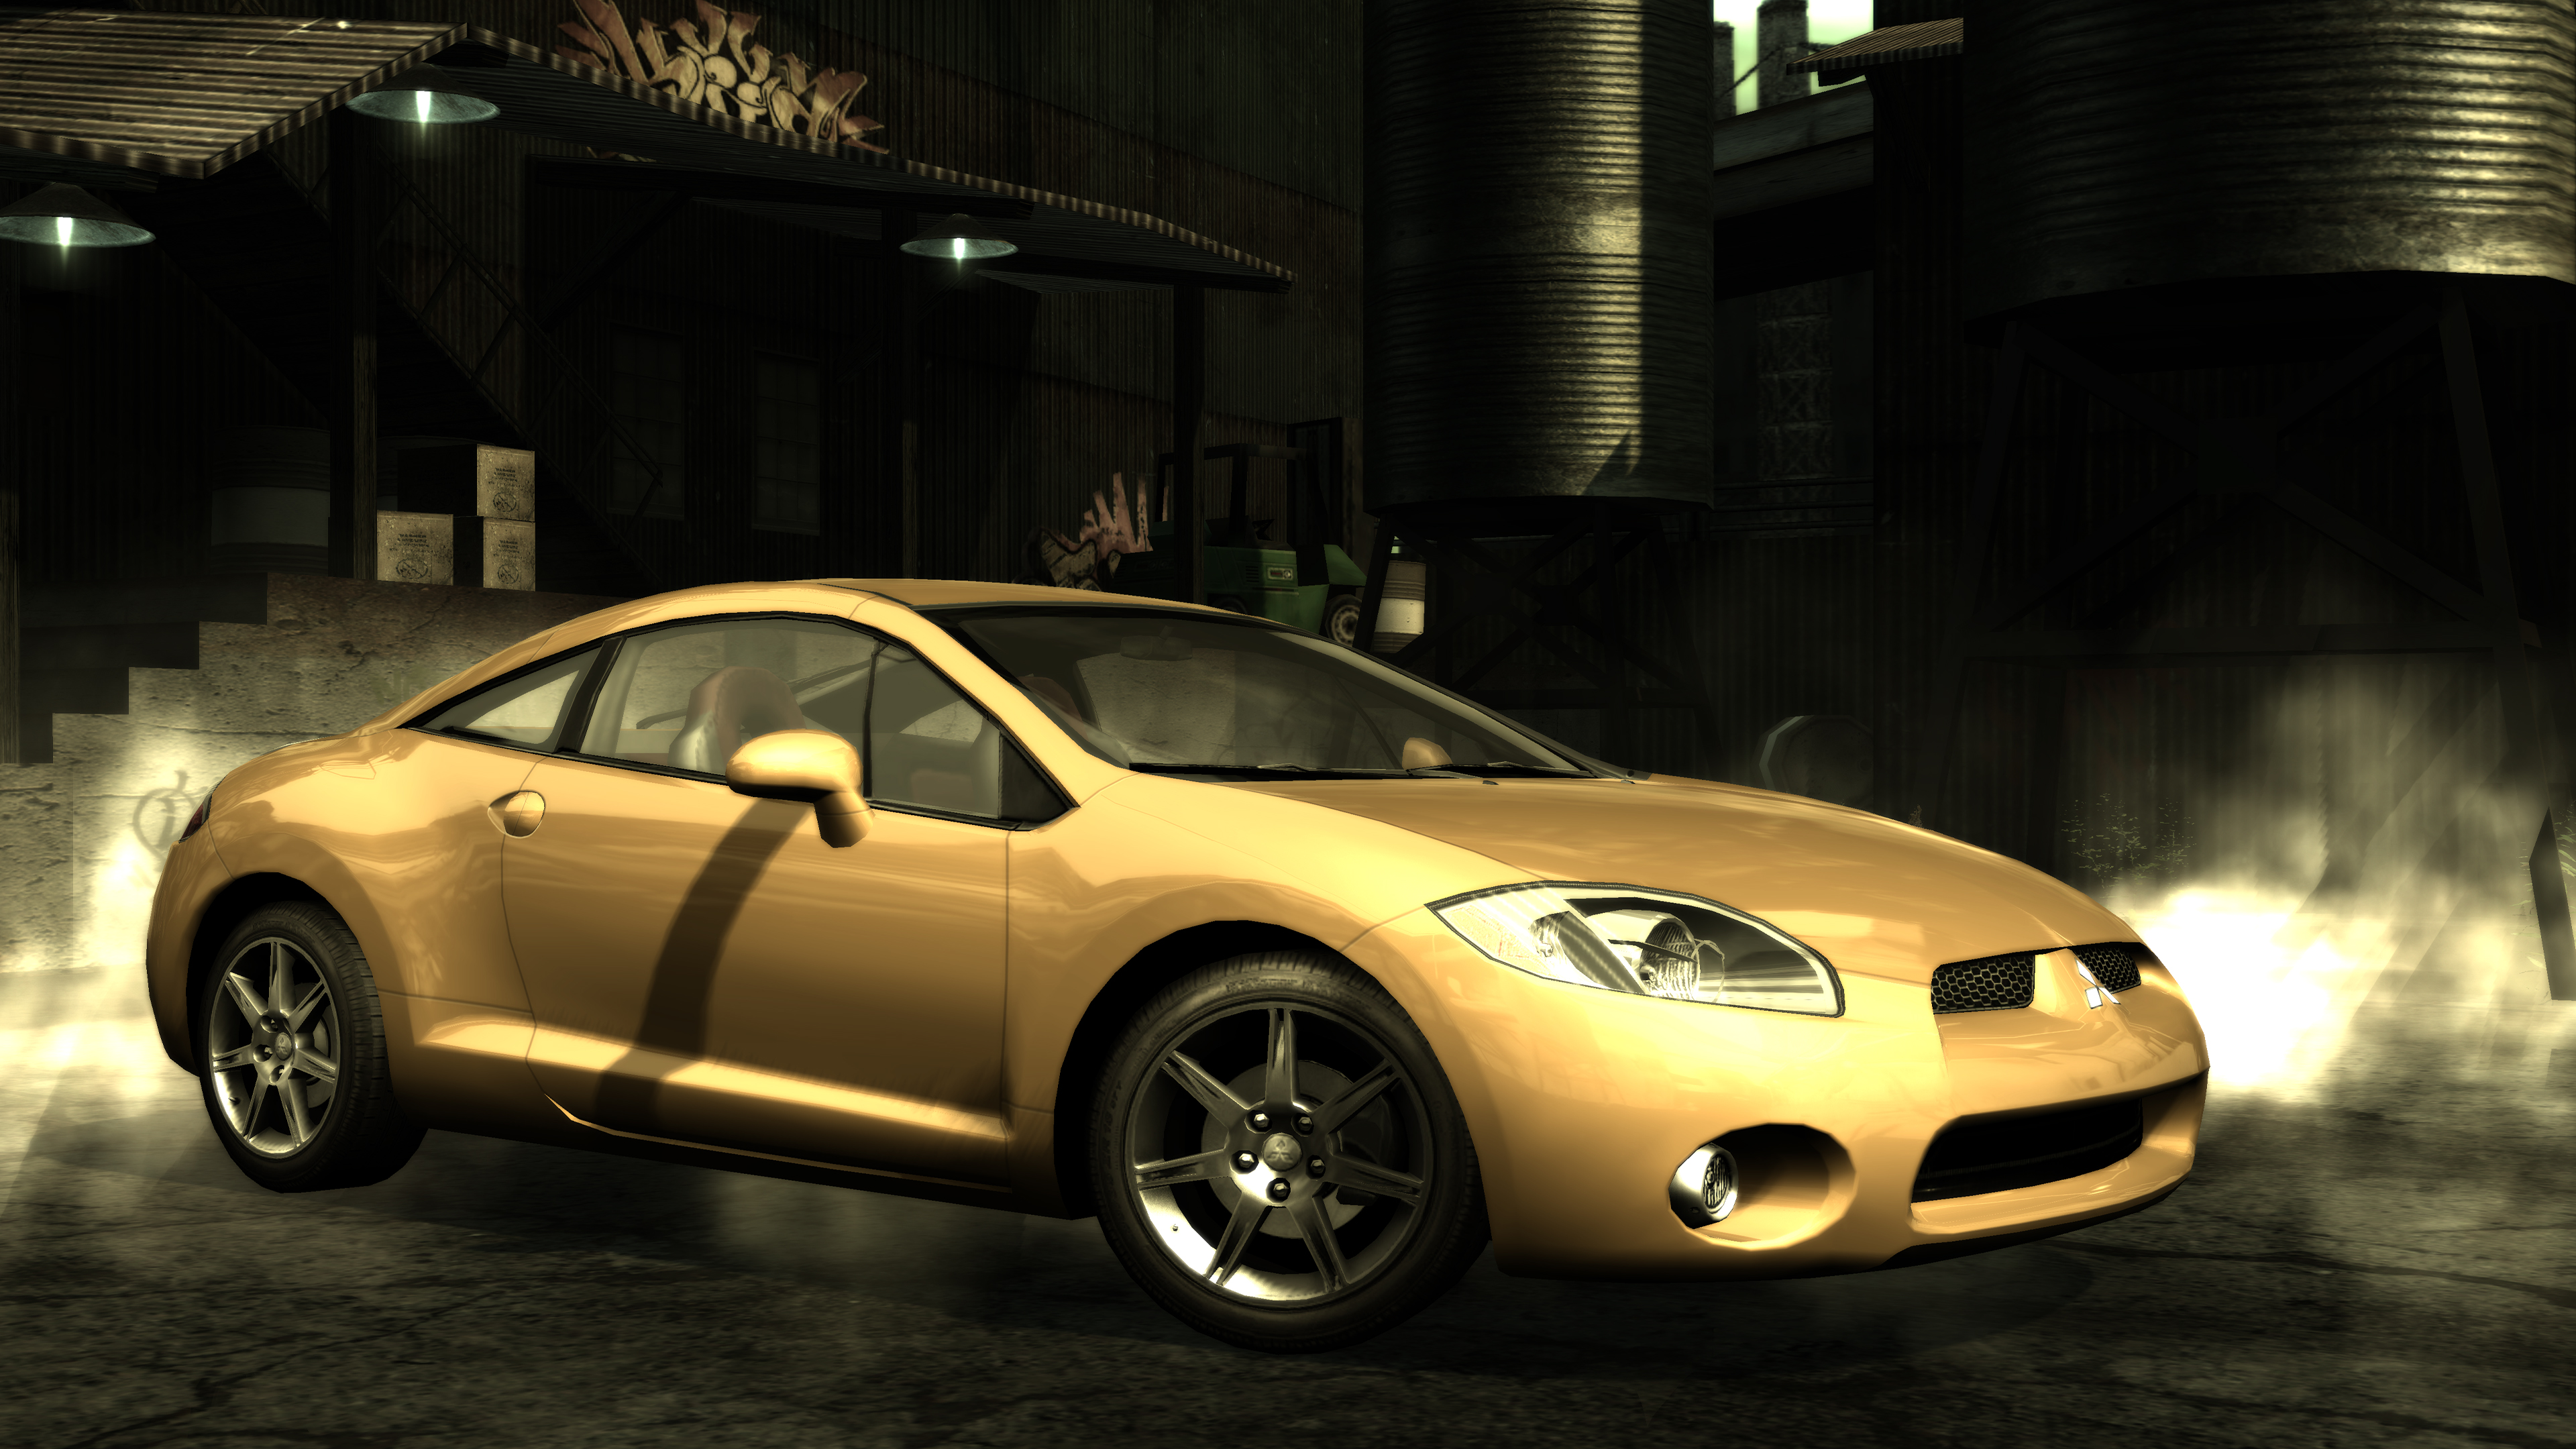 NFS MOST WANTED 2015